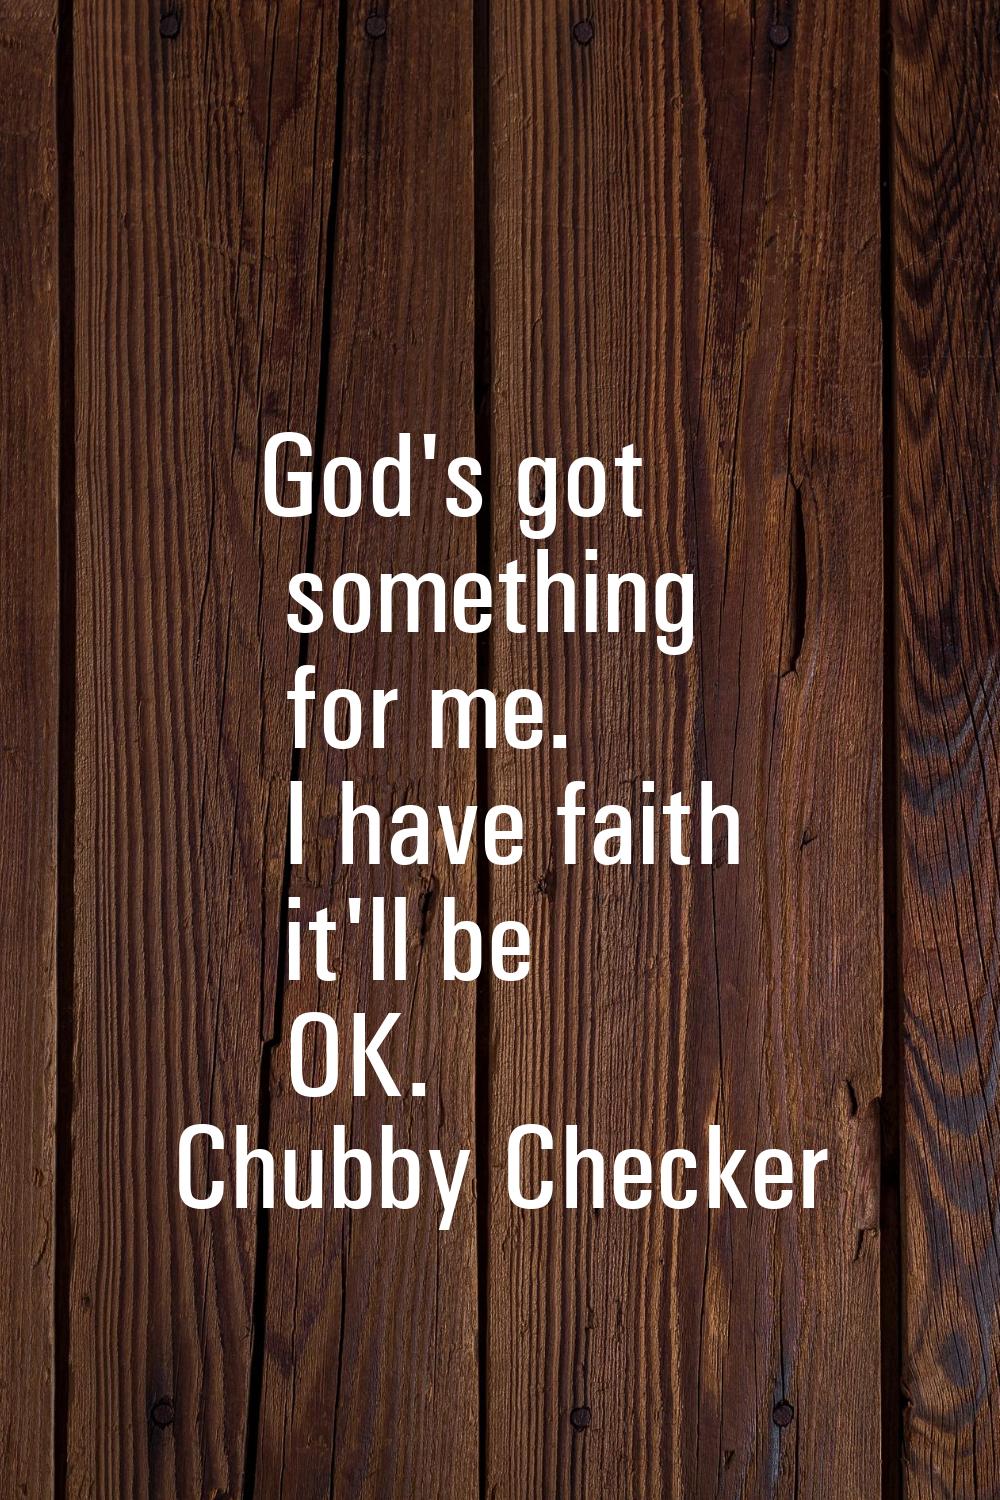 God's got something for me. I have faith it'll be OK.